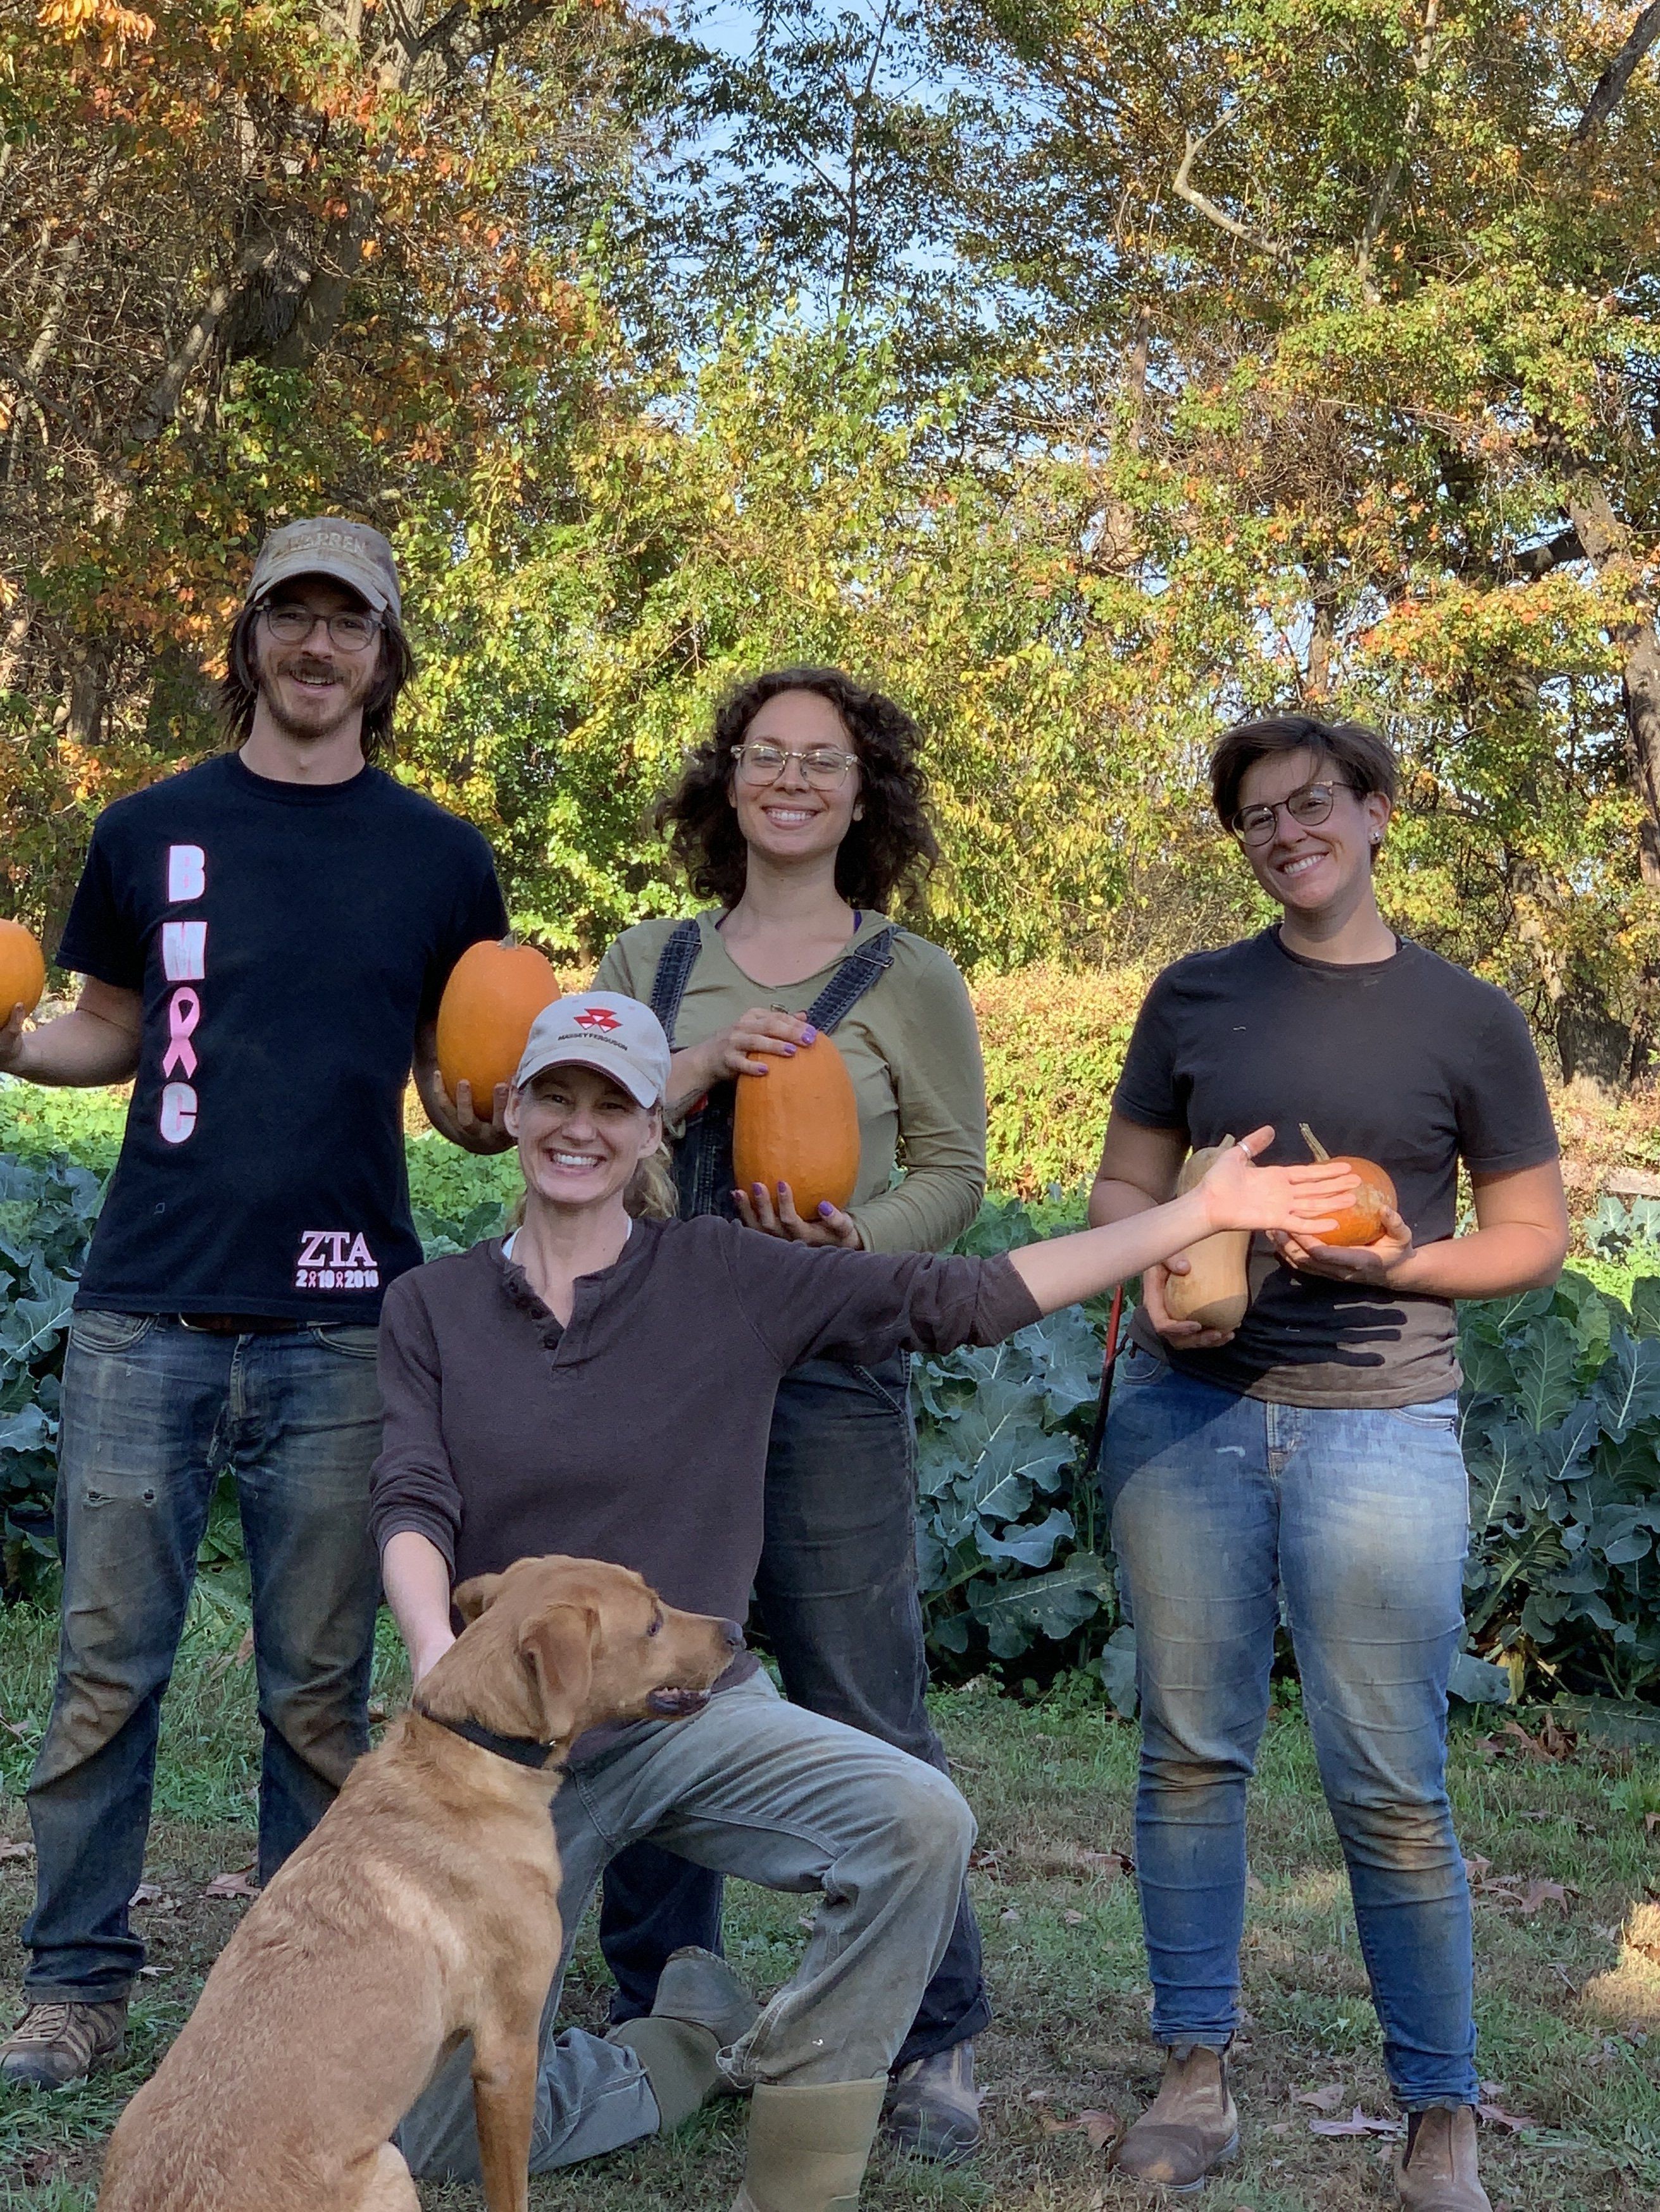 Previous Happening: Farm Happenings for October 27, 2020